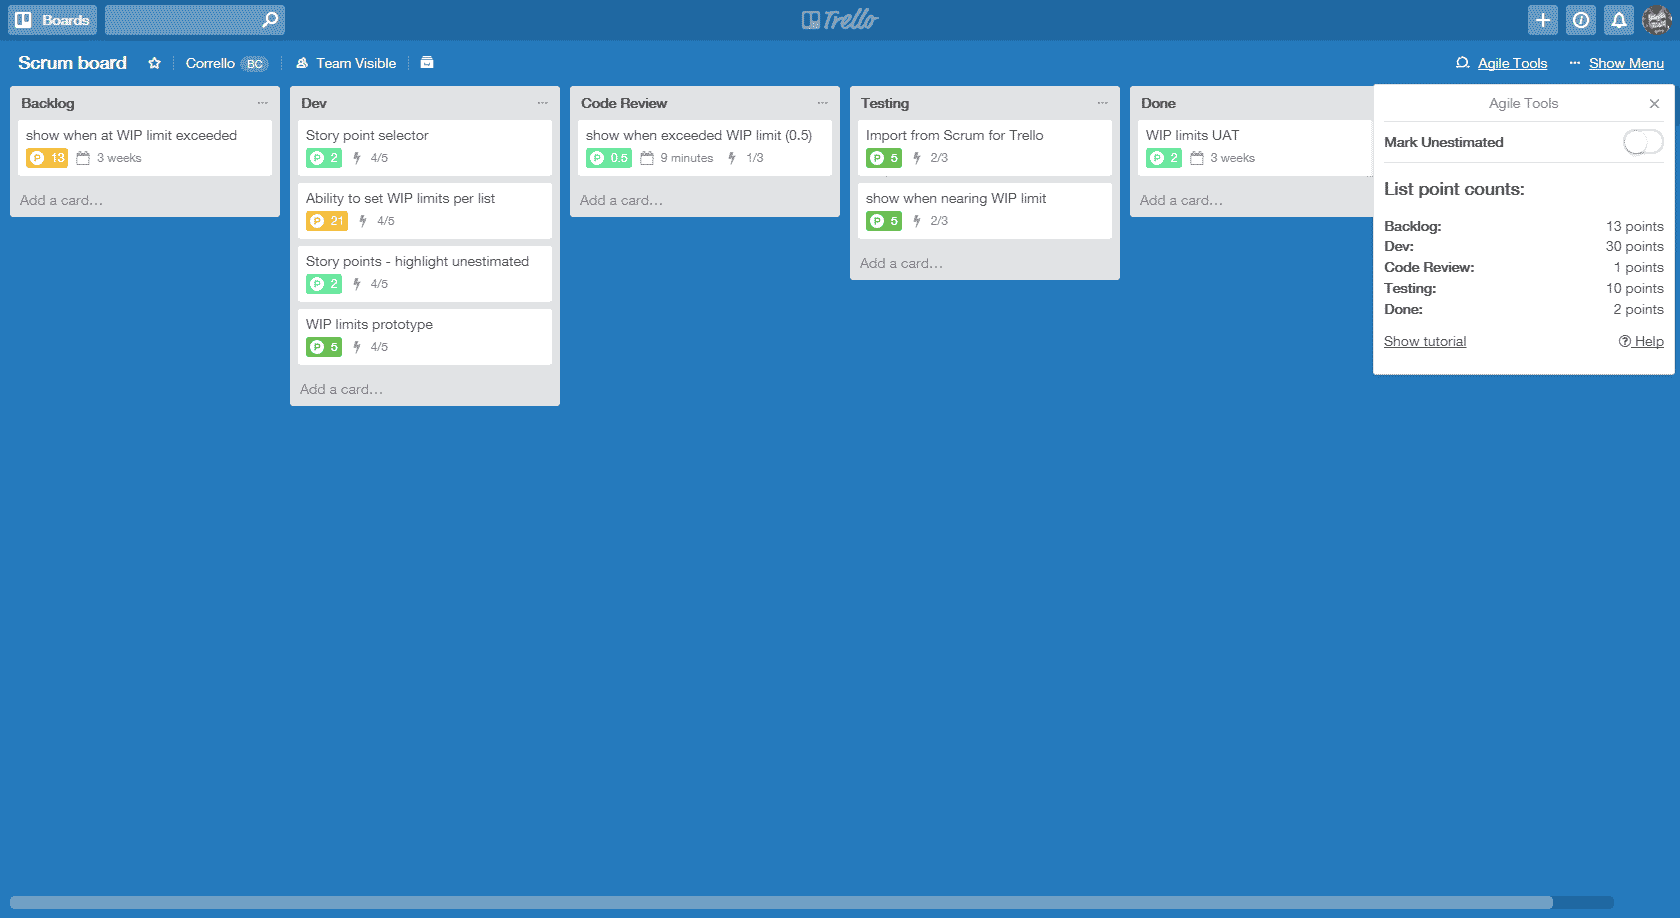 Legal teams use Trello to assign and track tasks.